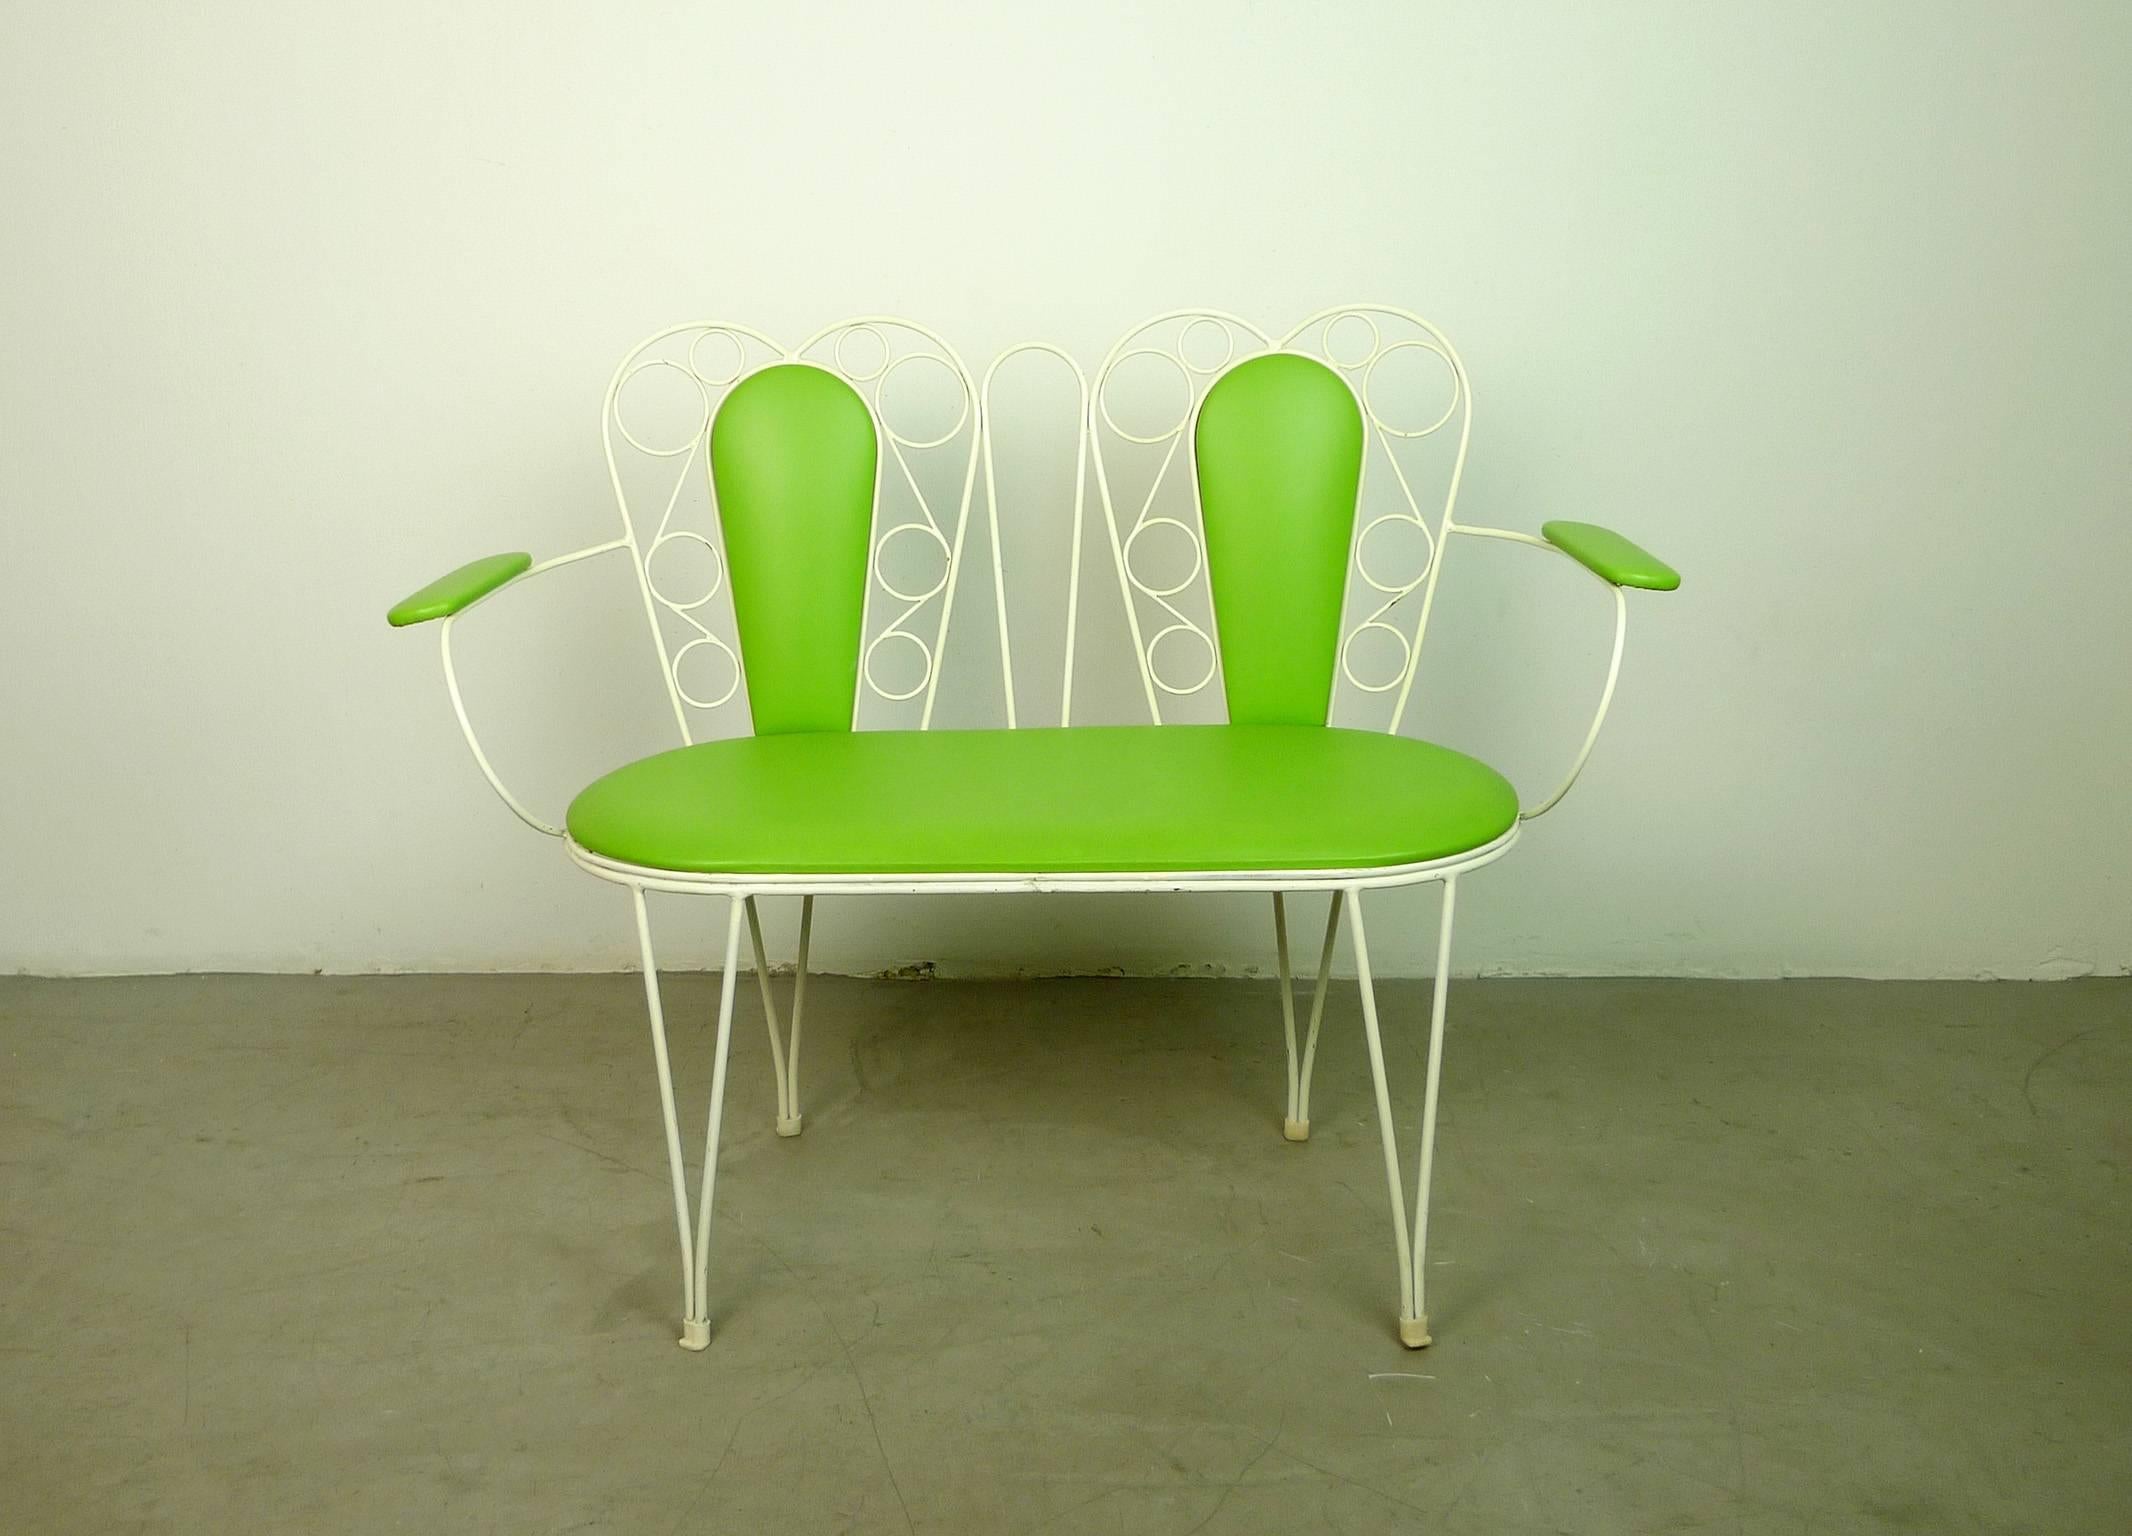 Lacquered Gorgeous 1960s Garden Set in Green and White from Eastern Germany